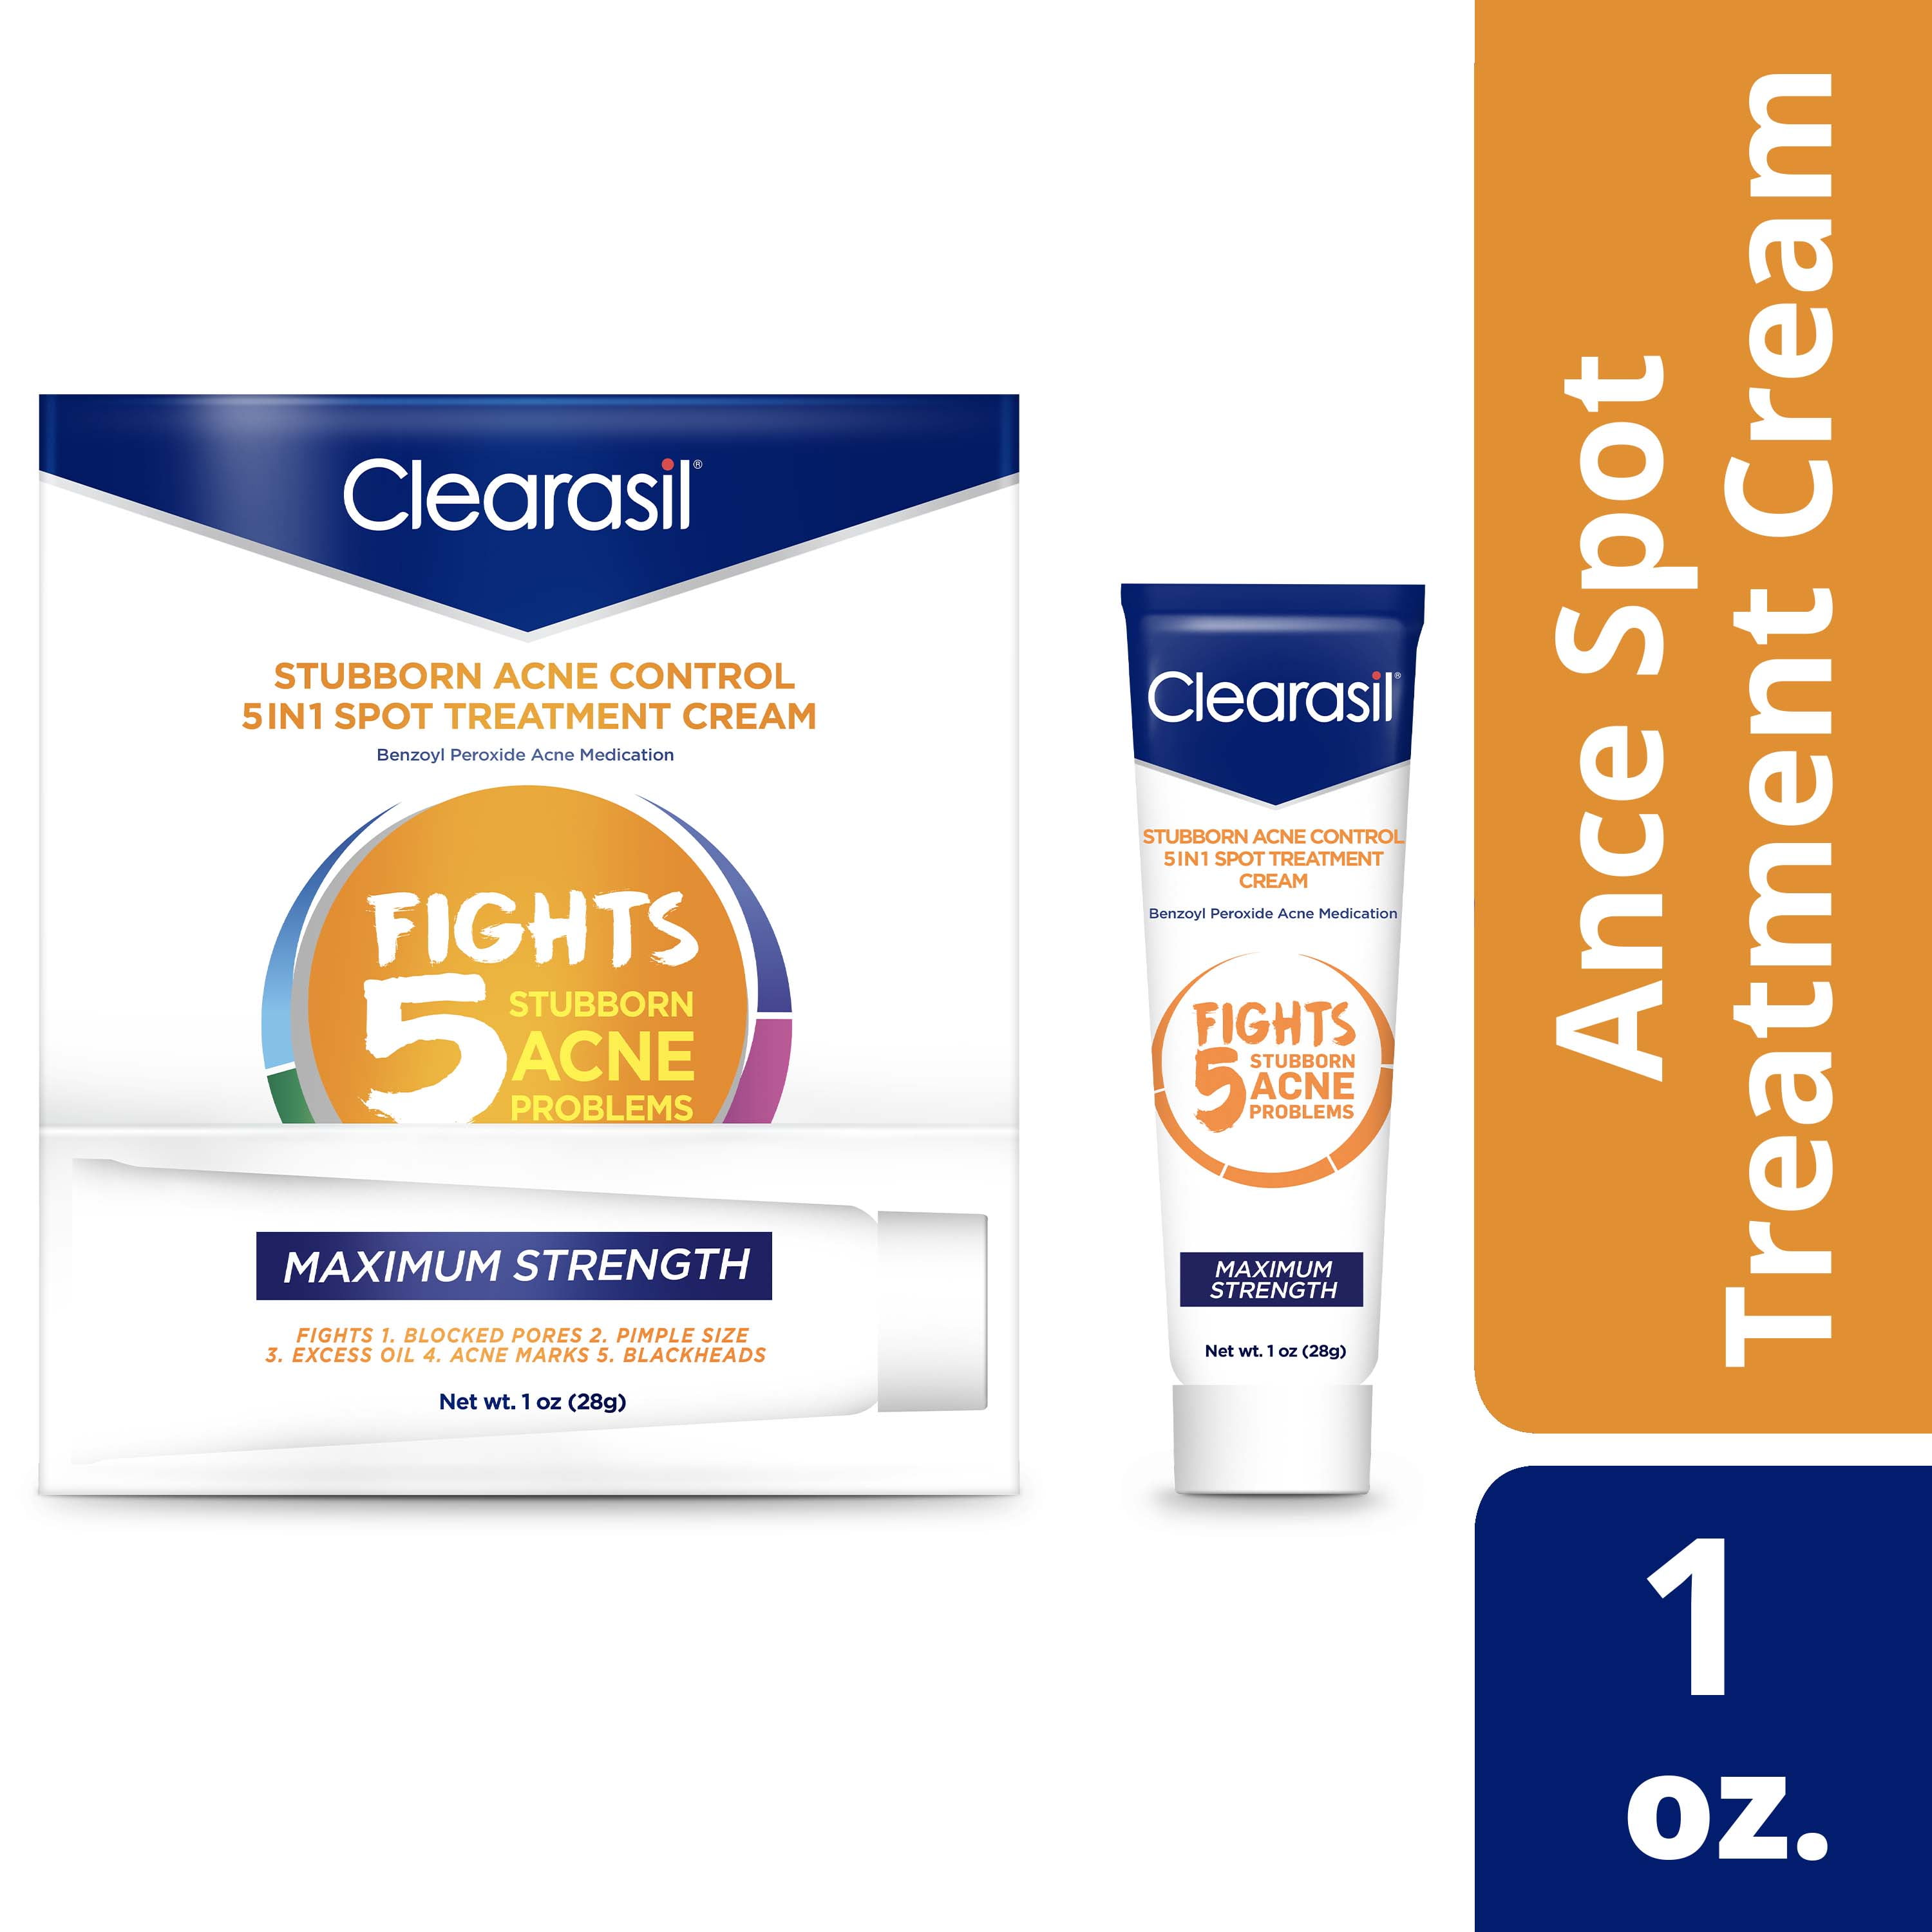 Clearasil Stubborn Acne Control 5in1 Spot Treatment Cream, Maximum Strenght with 10% Benzoyl Peroxide, Acne Medication, 1 oz